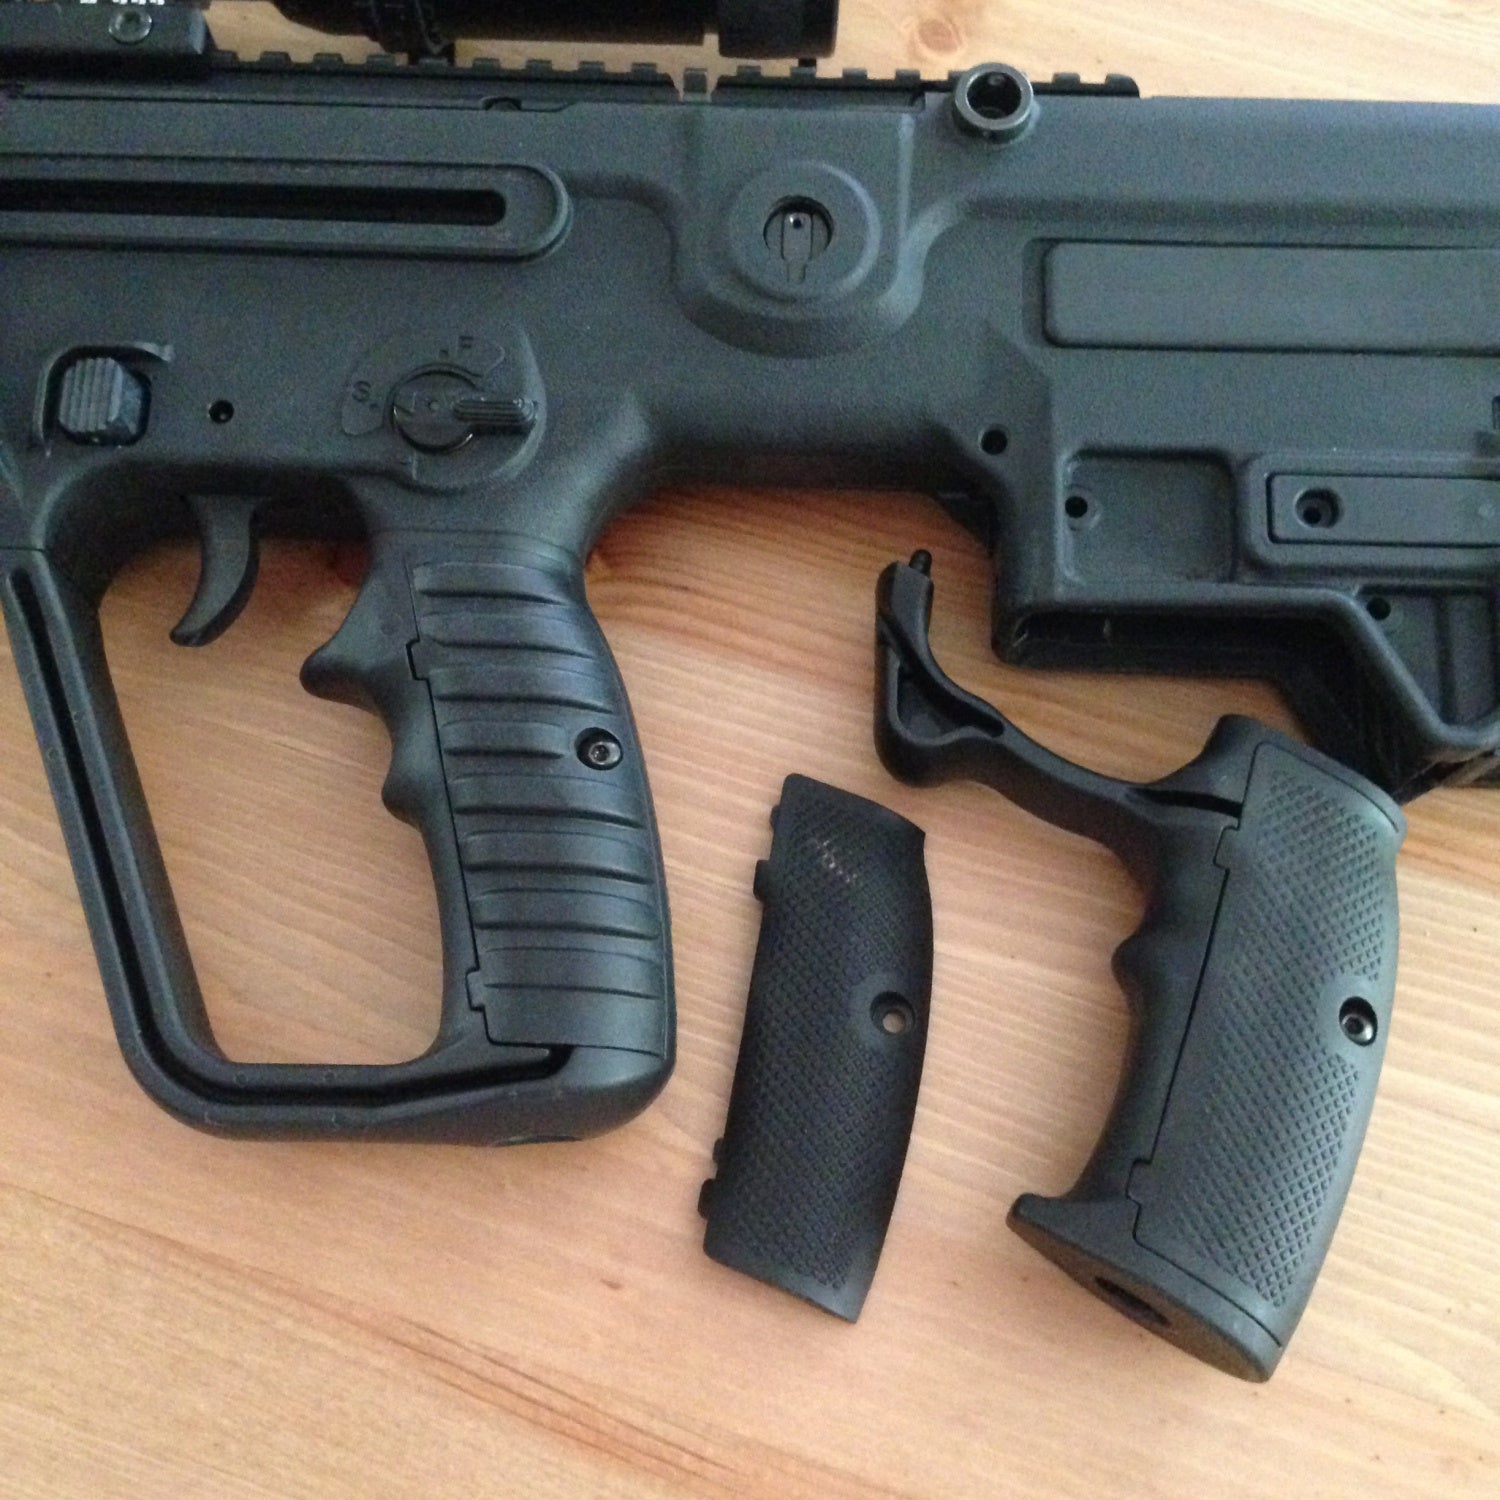 Like the Tavor SAR, the X95 has a cutlass style hand guard that acts as a g...